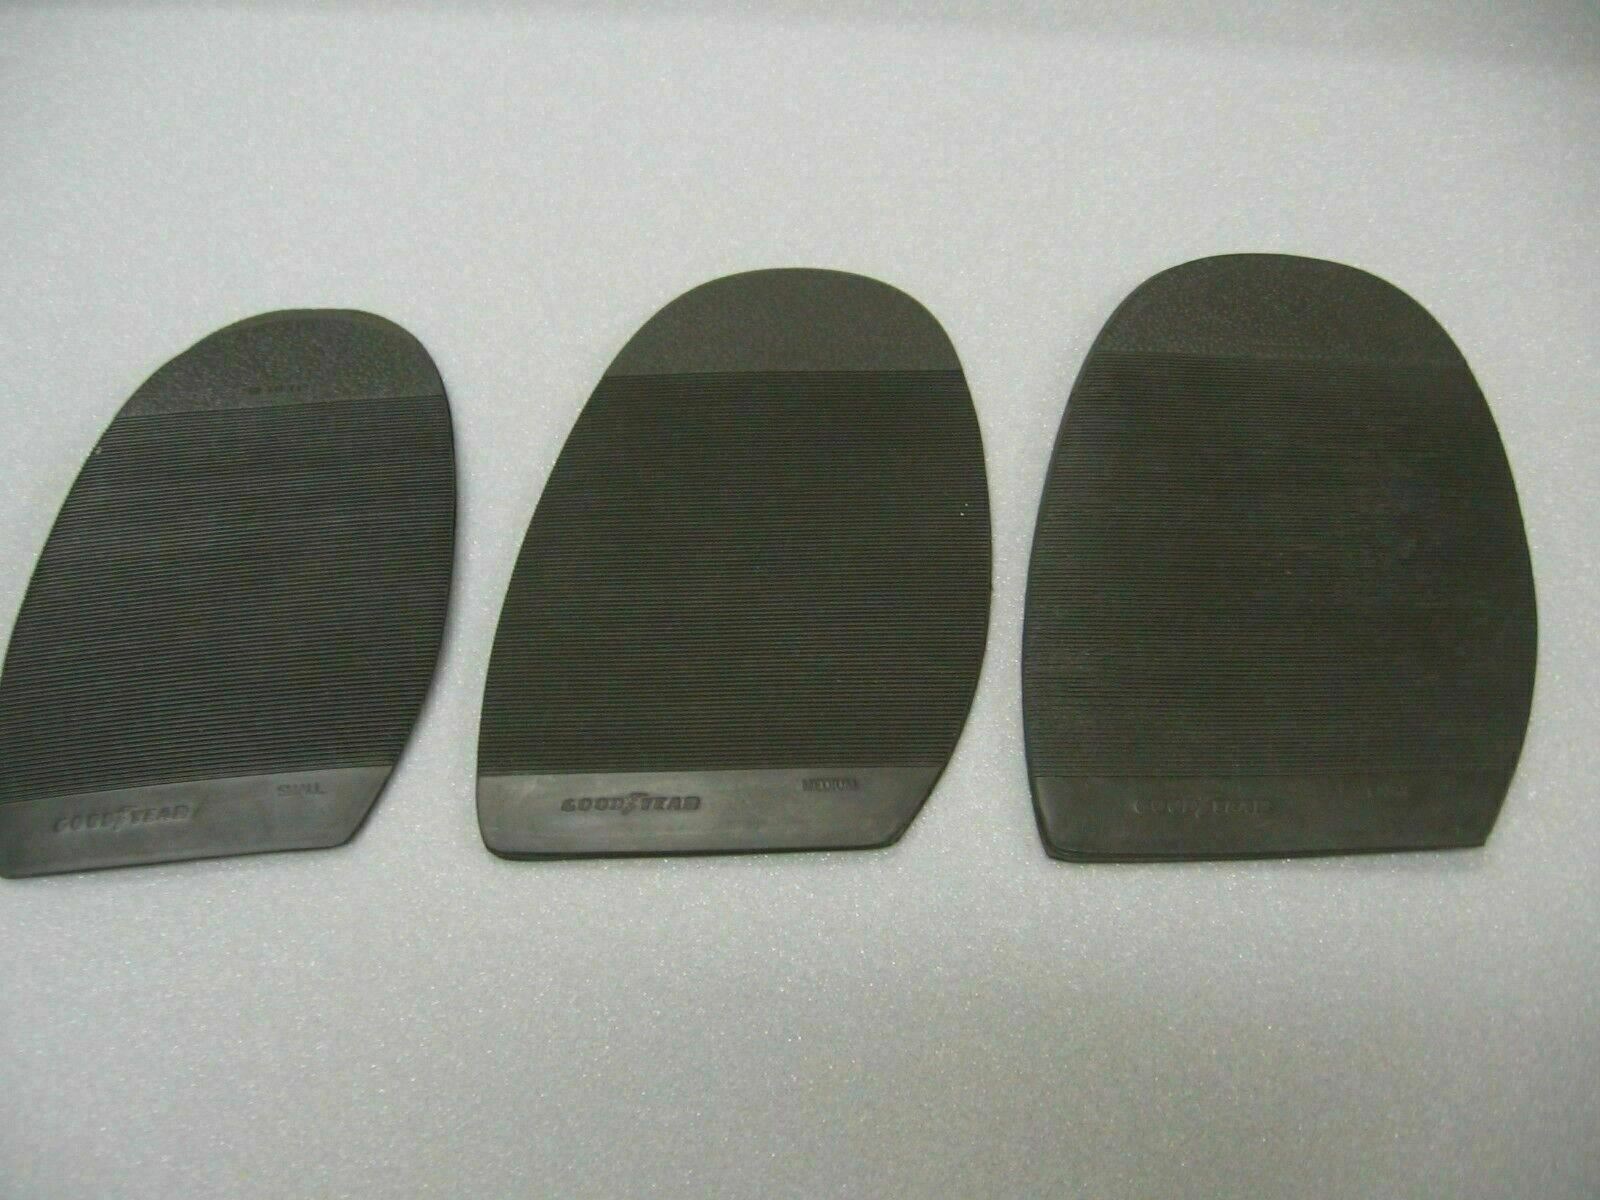 GoodYear  Neolite Protective Half Sole Guards -Shoe Repair - Pic-A-Size  -1 Pair